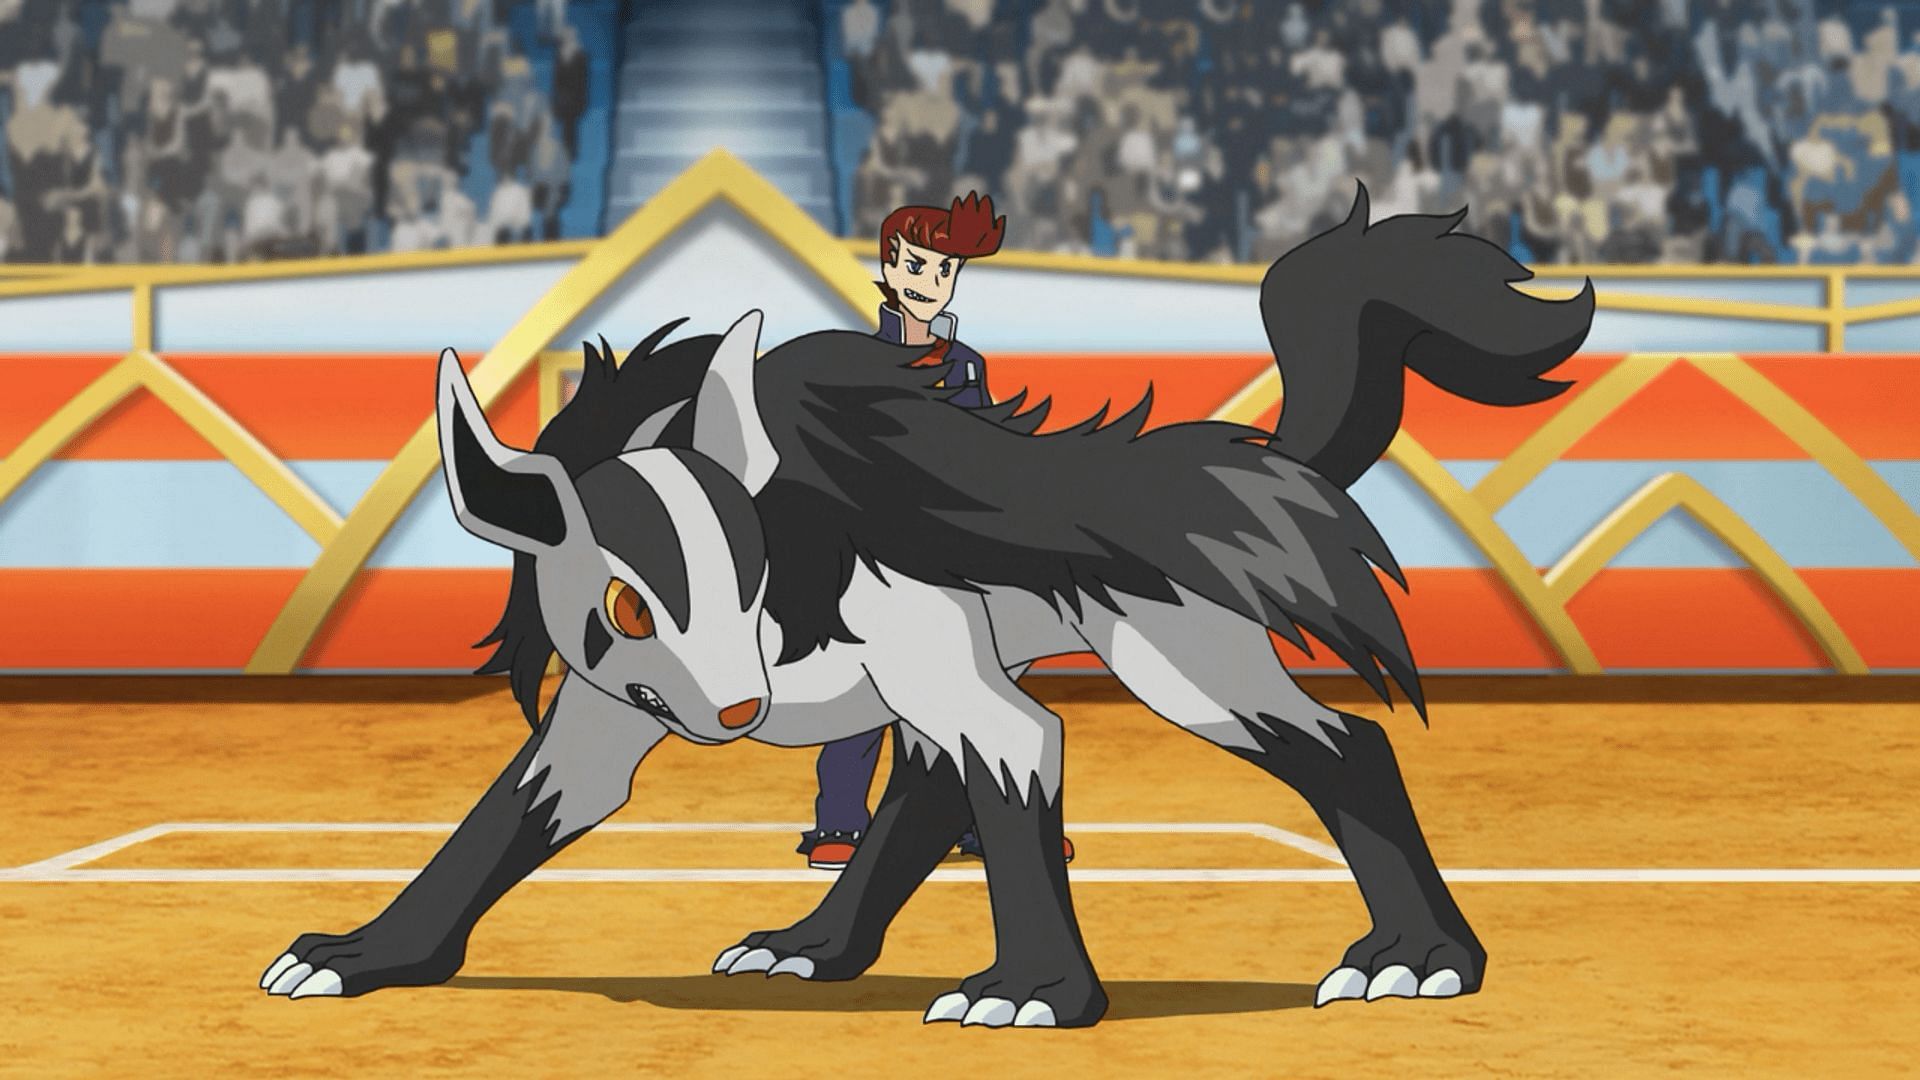 MIghtyena as it appears in the anime (Image via The Pokemon Company)